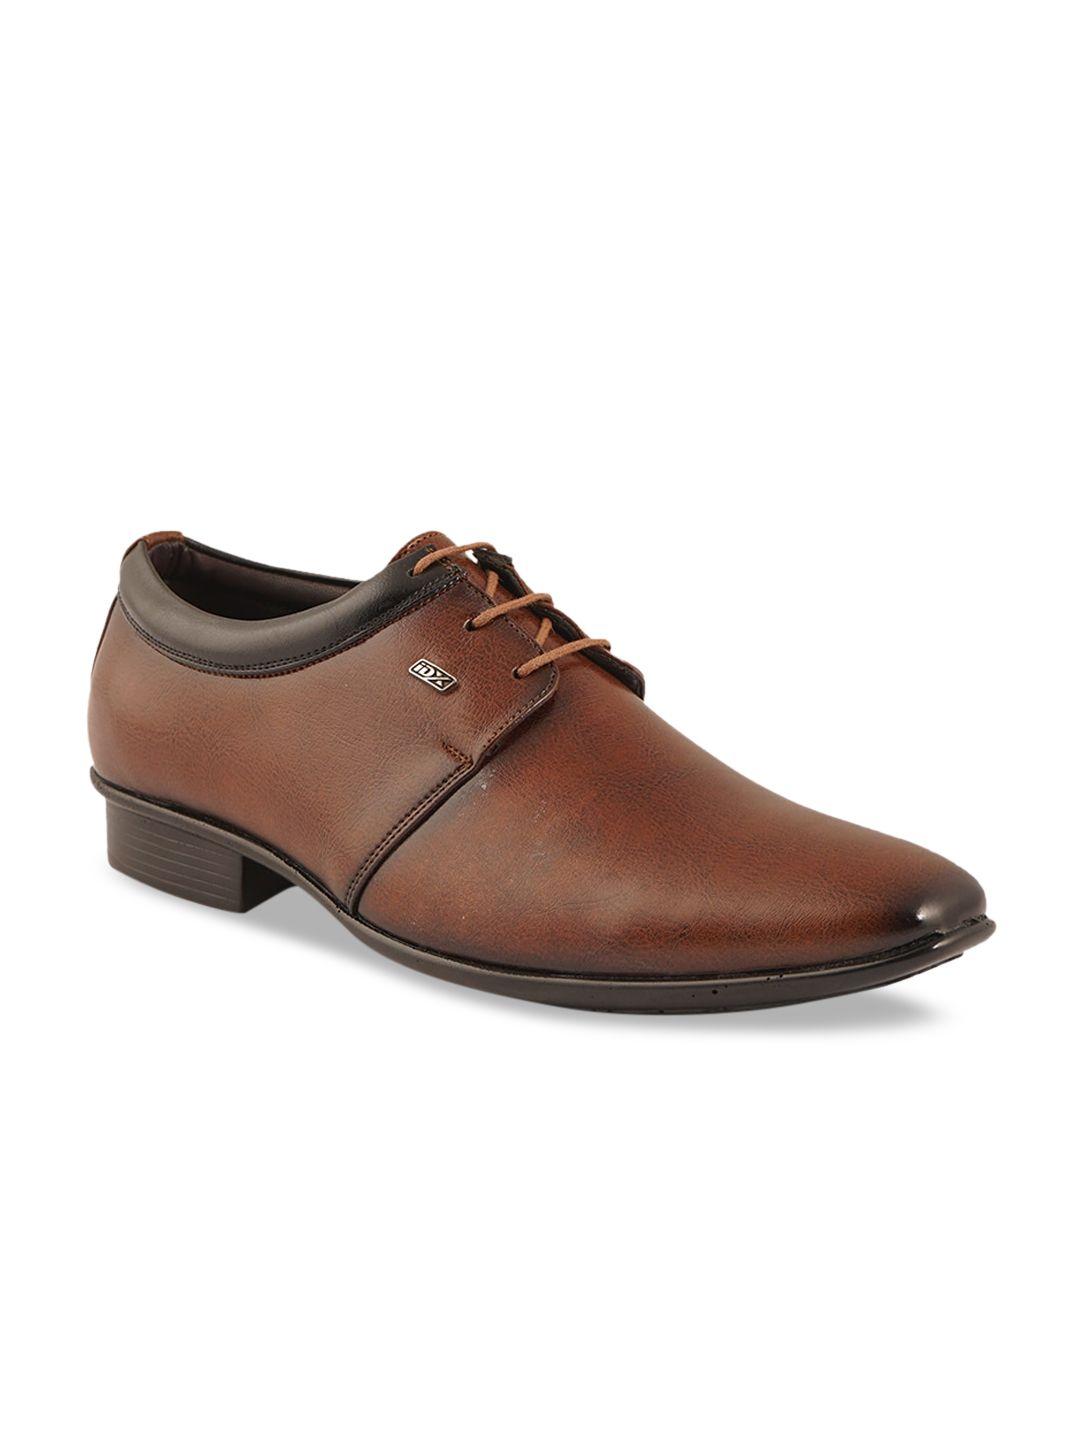 id men solid lace up oxfords formal shoes